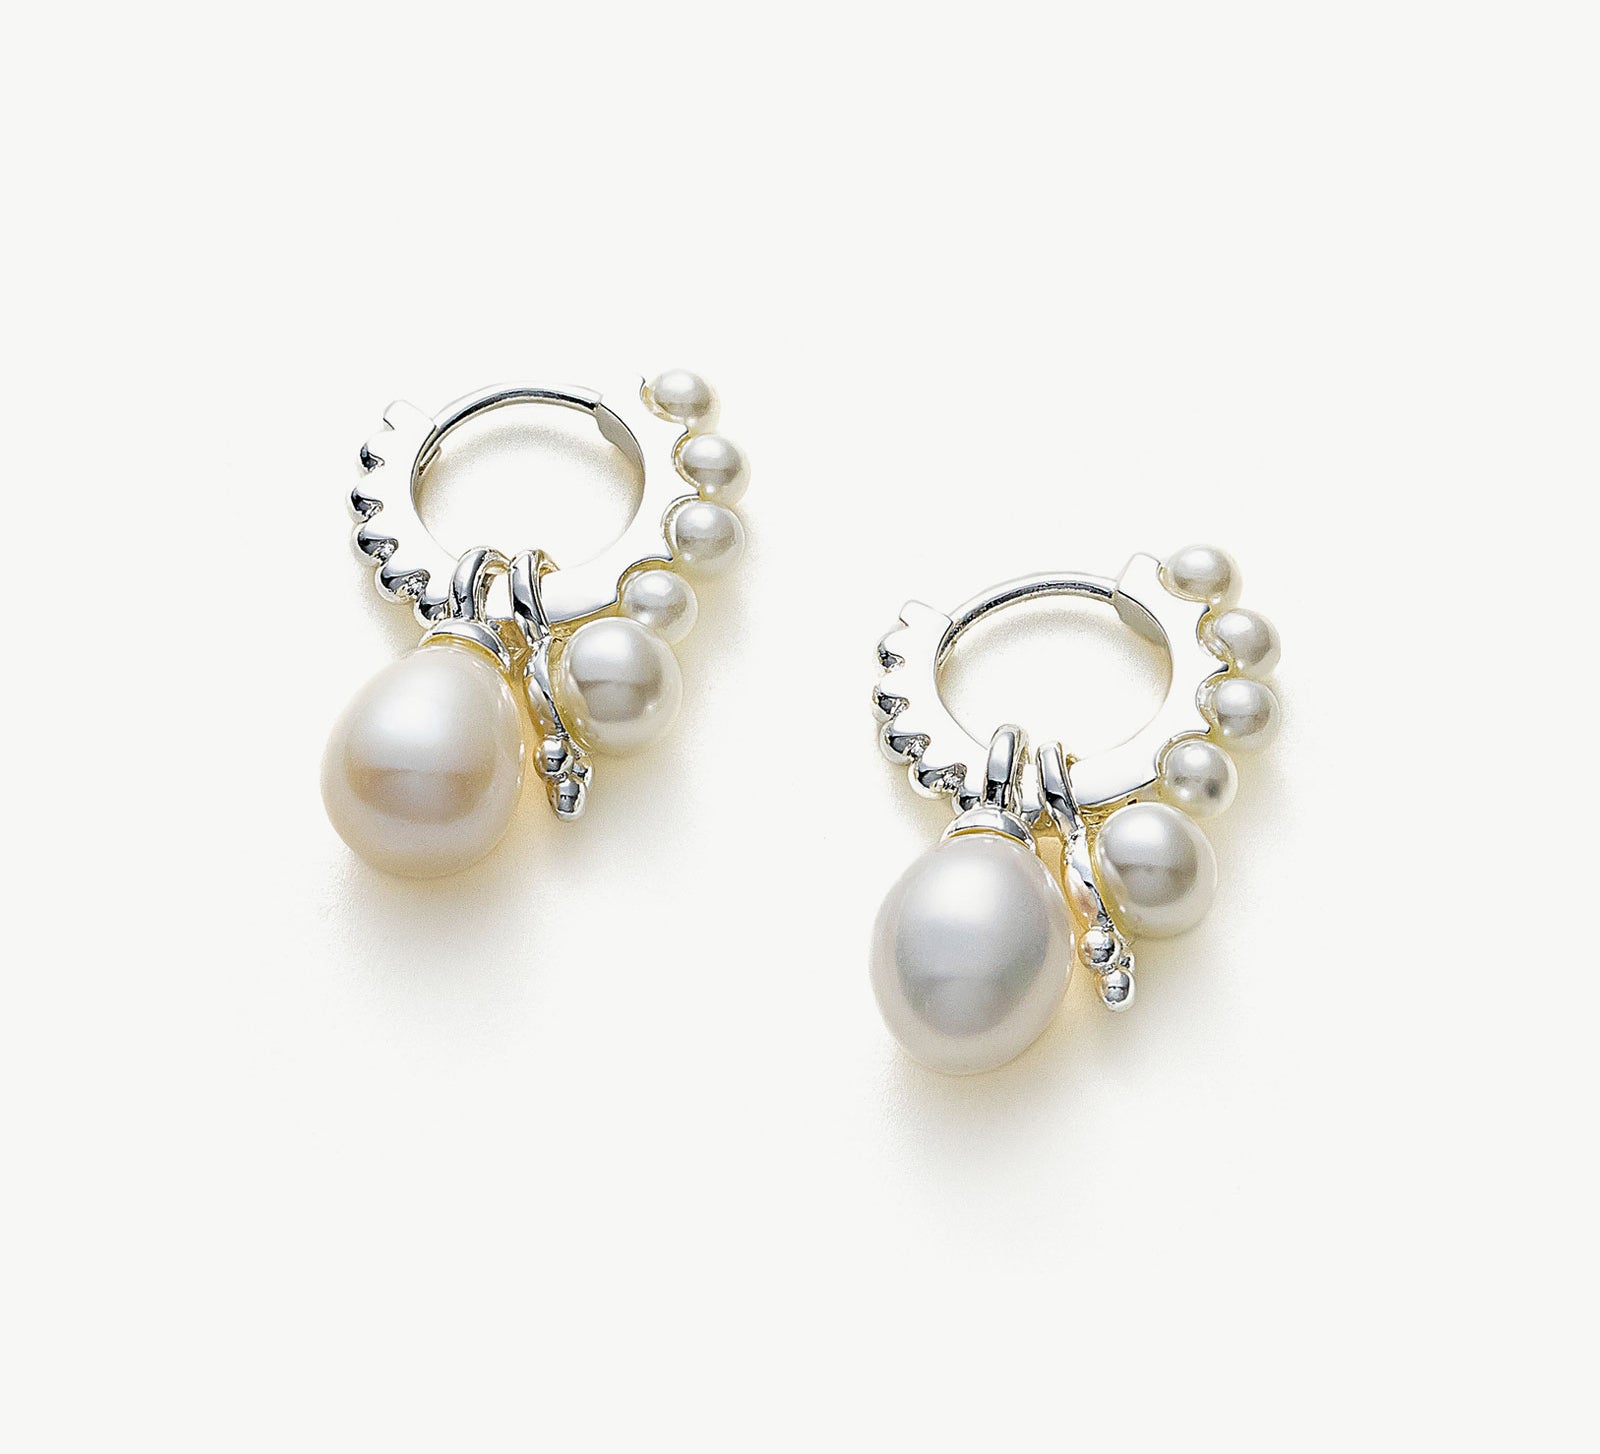 Pearl Huggie Hoops in Silver, a sleek and stylish accessory that embraces your ears with the timeless elegance of pearls against a silver backdrop